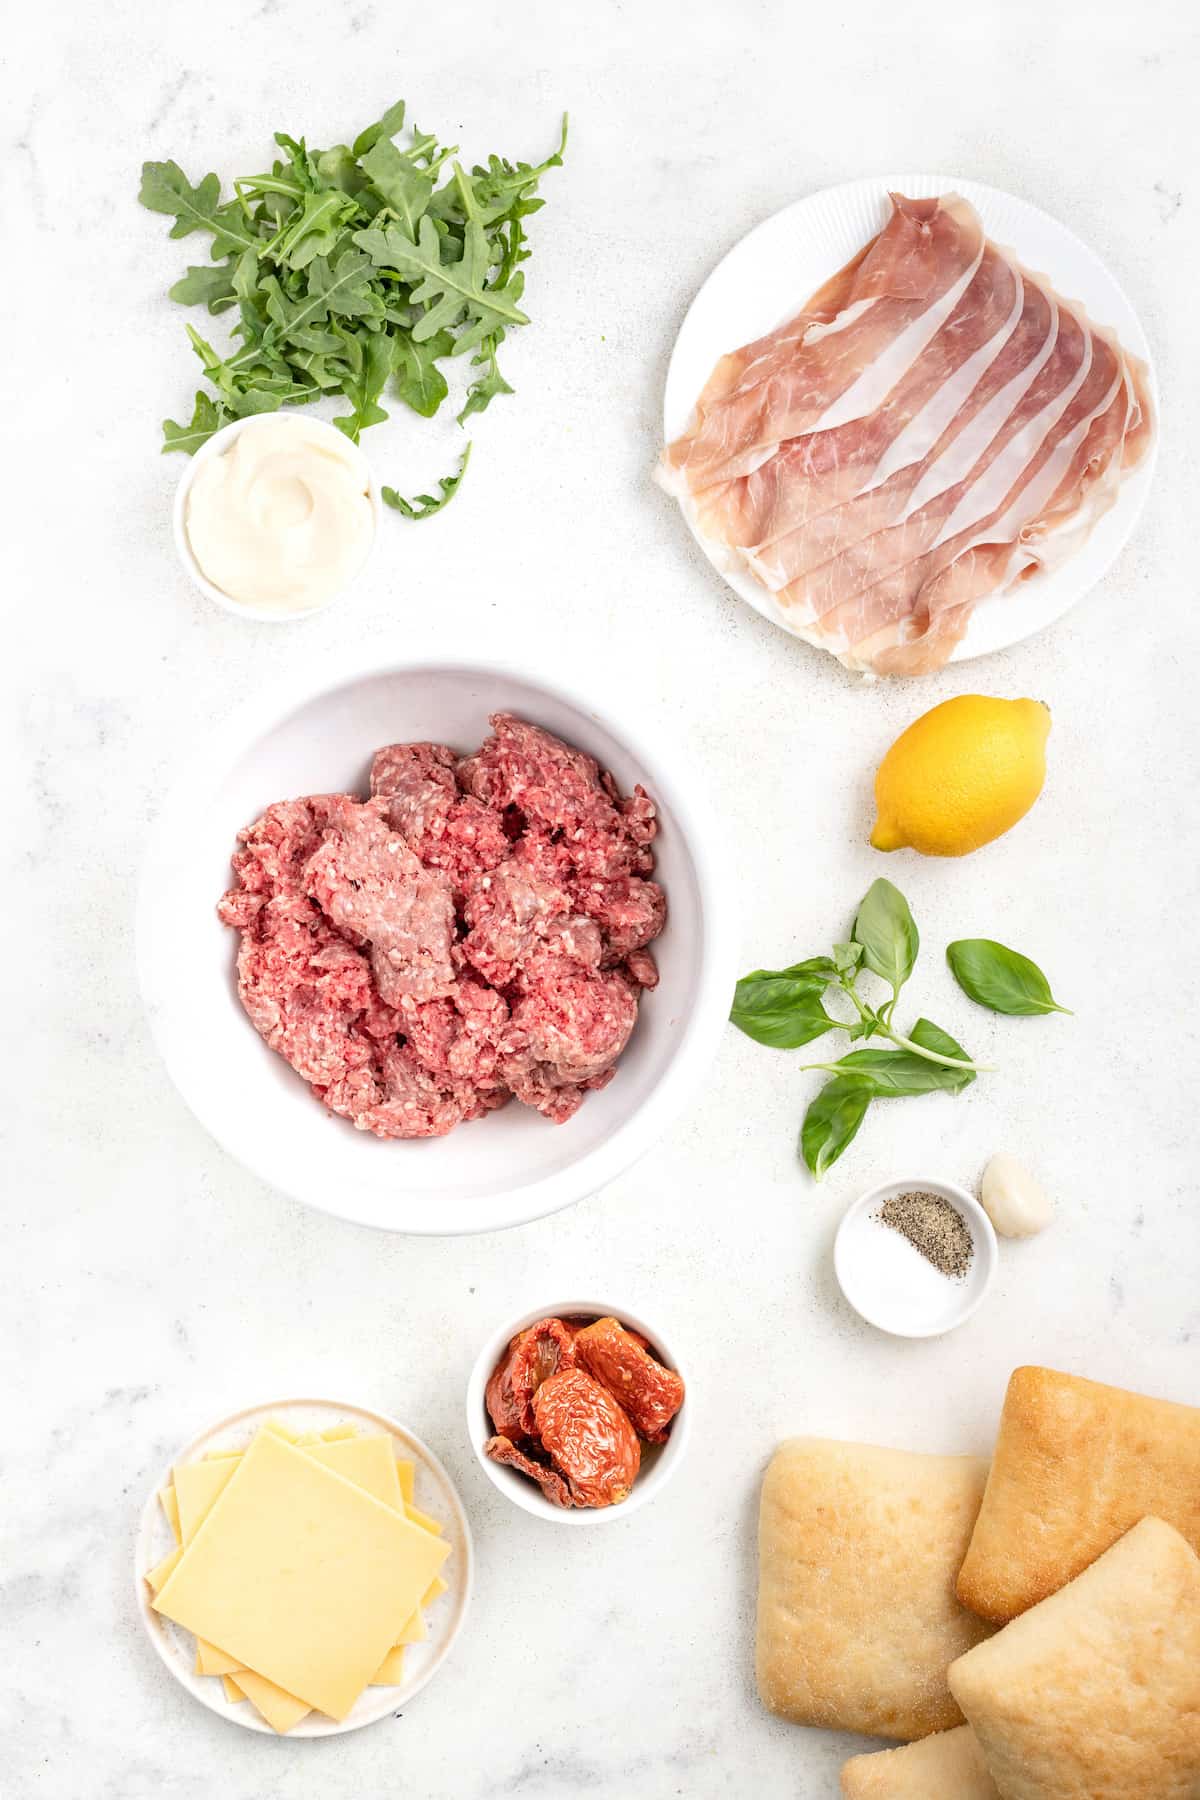 Ingredients for the Italian burger. 